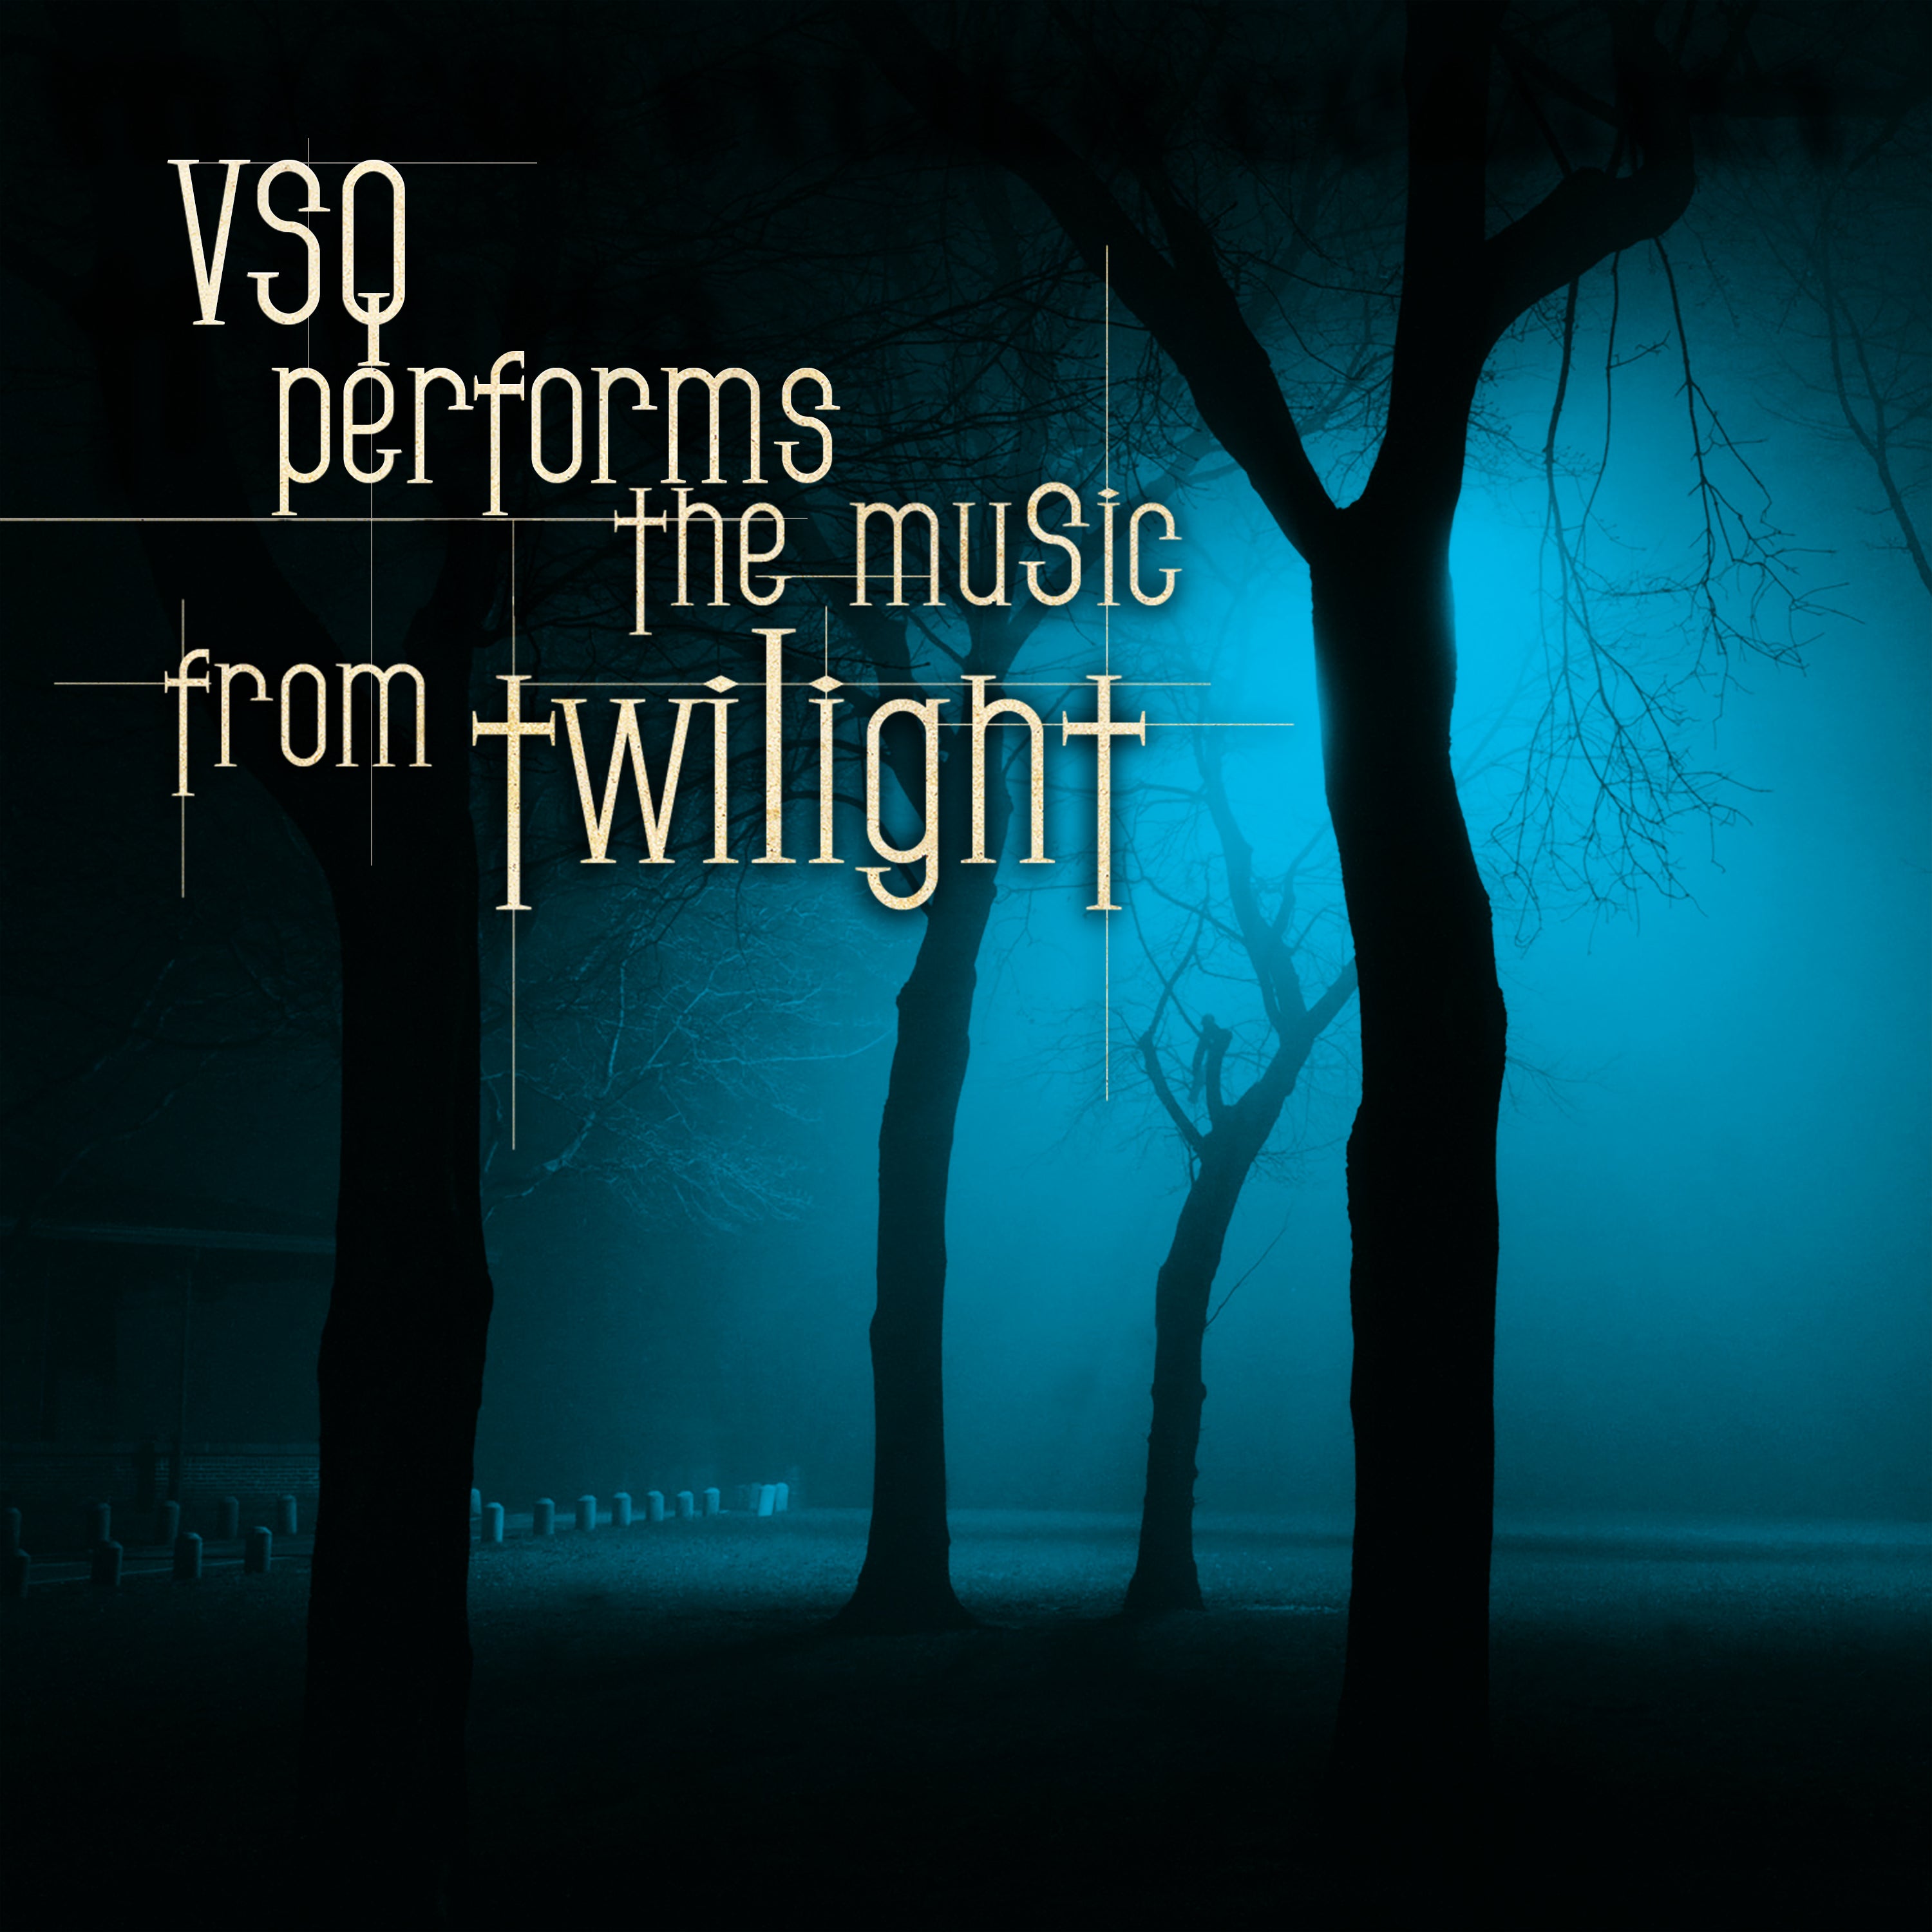 VSQ Performs the Music from Twilight